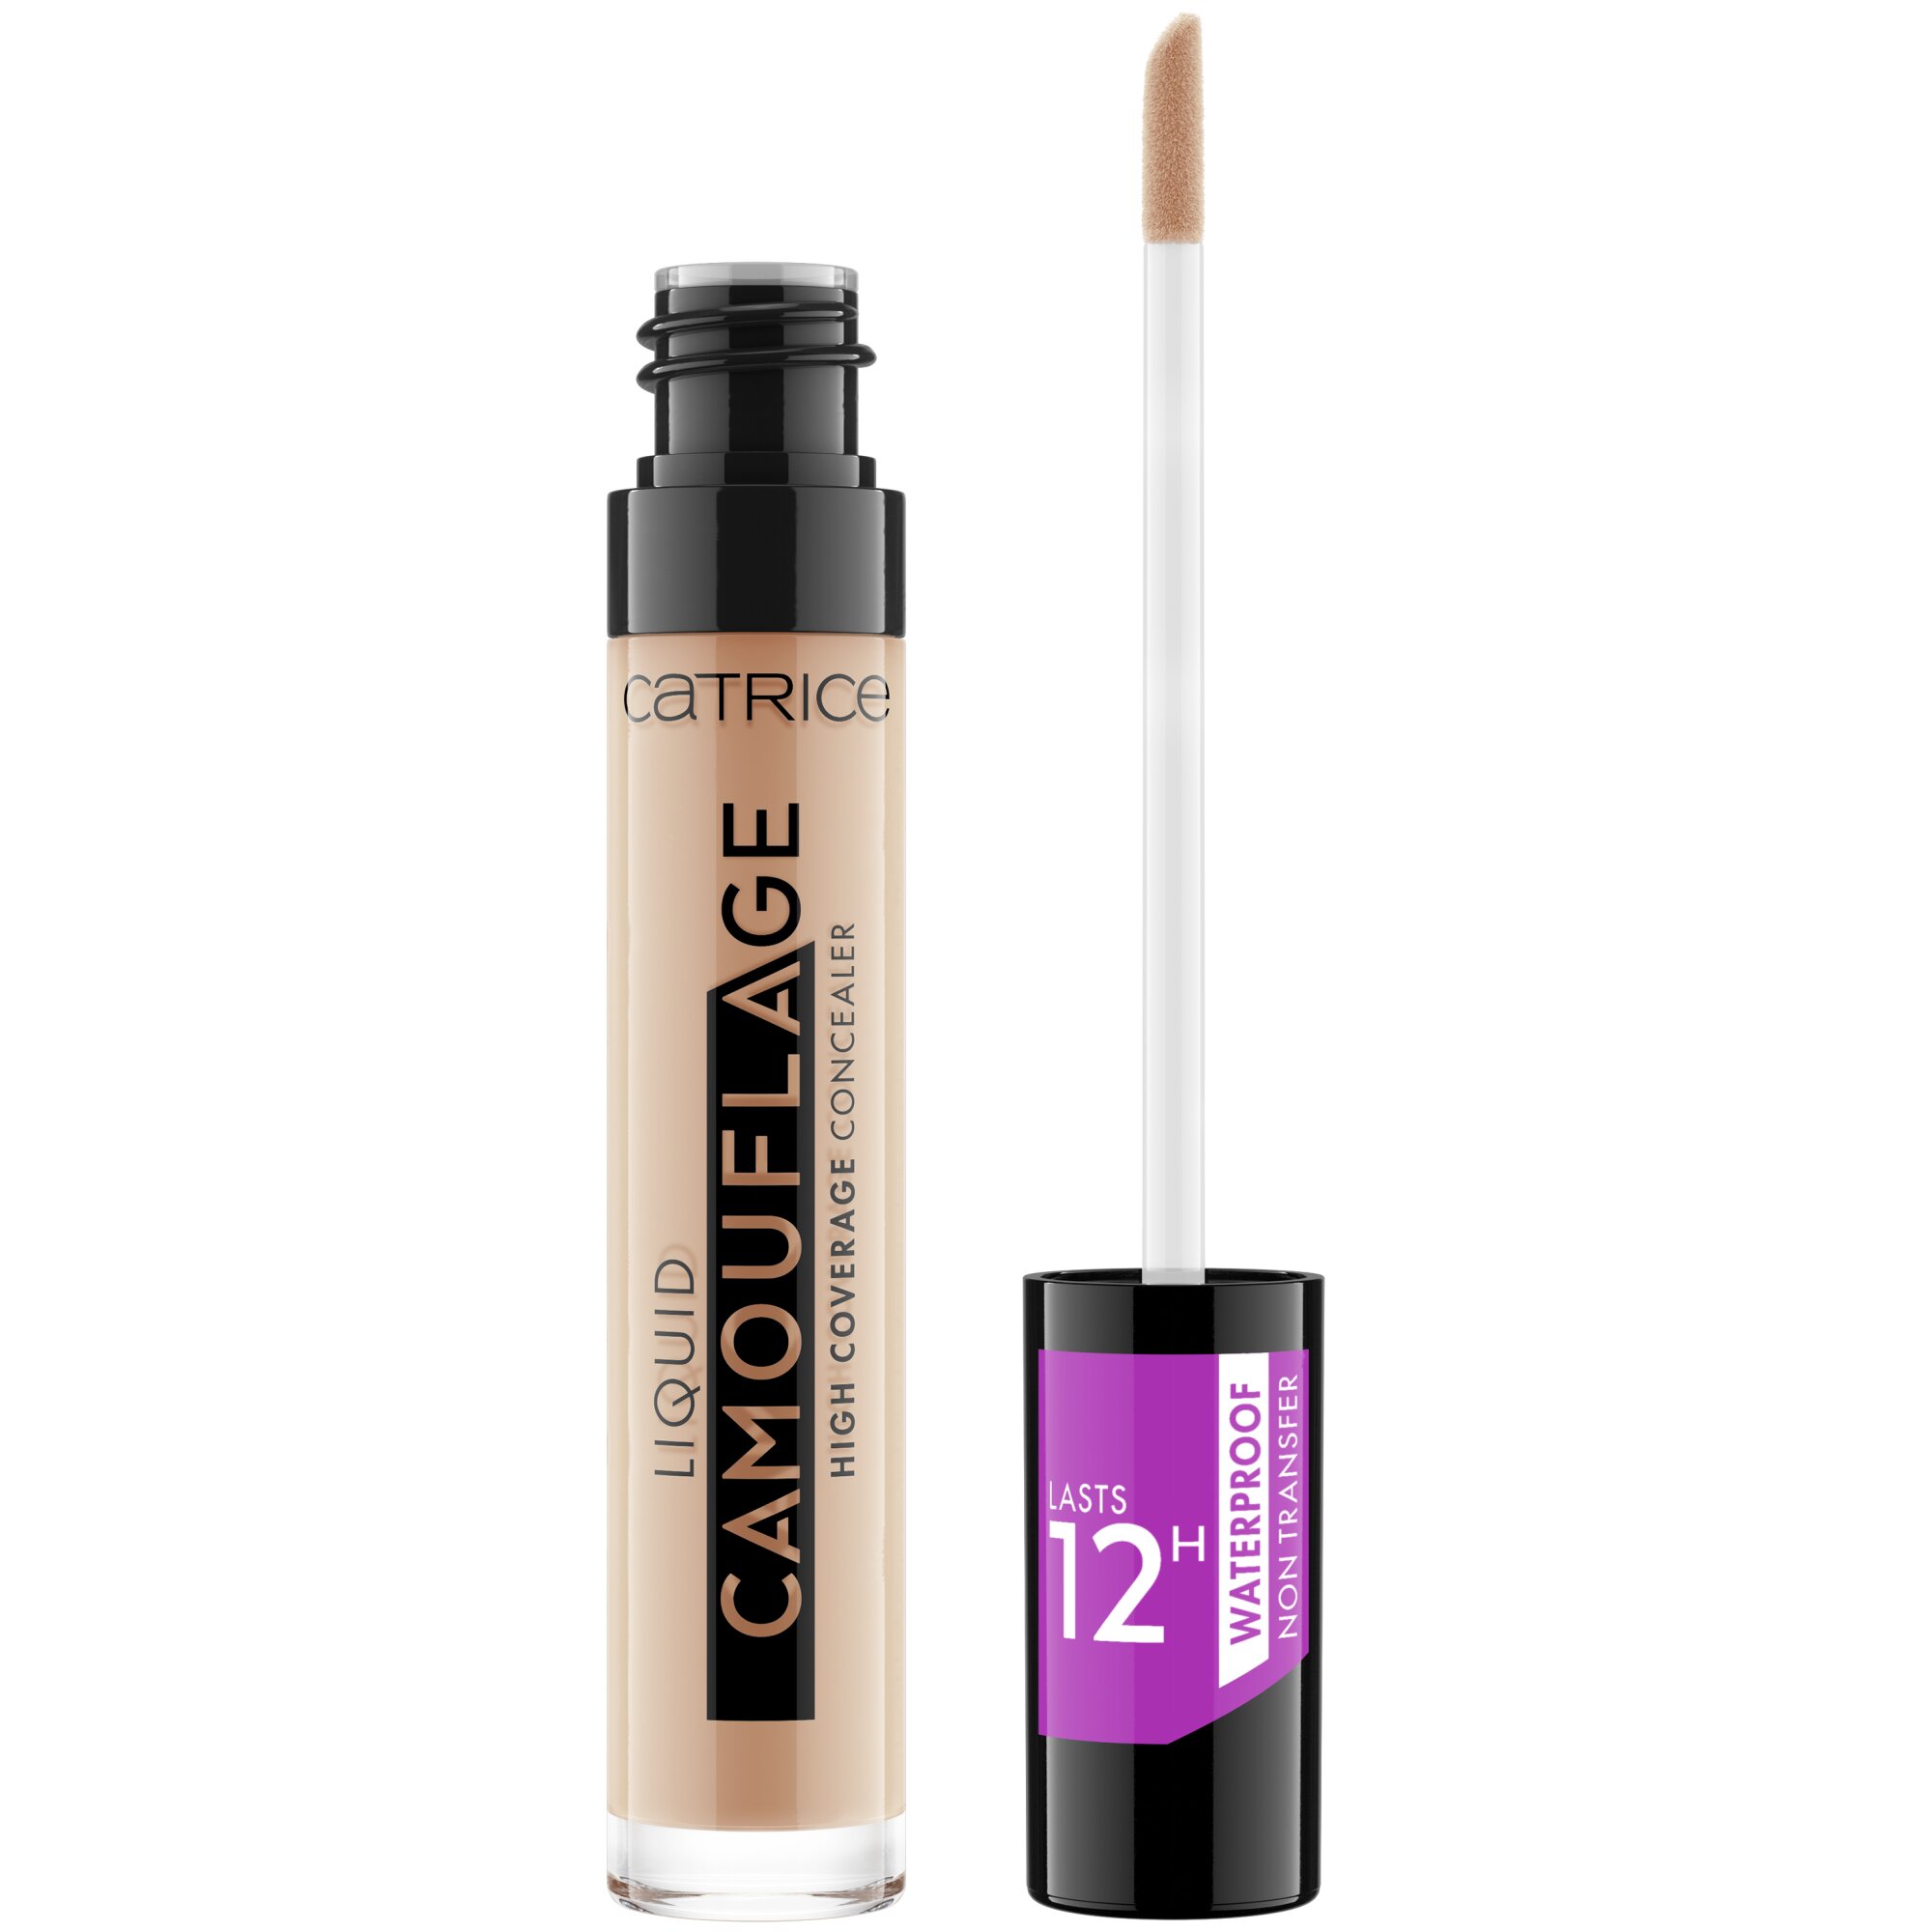 Corector lichid Camouflage High Coverage, Nuanta 020 - Light Beige, 5 ml, Catrice